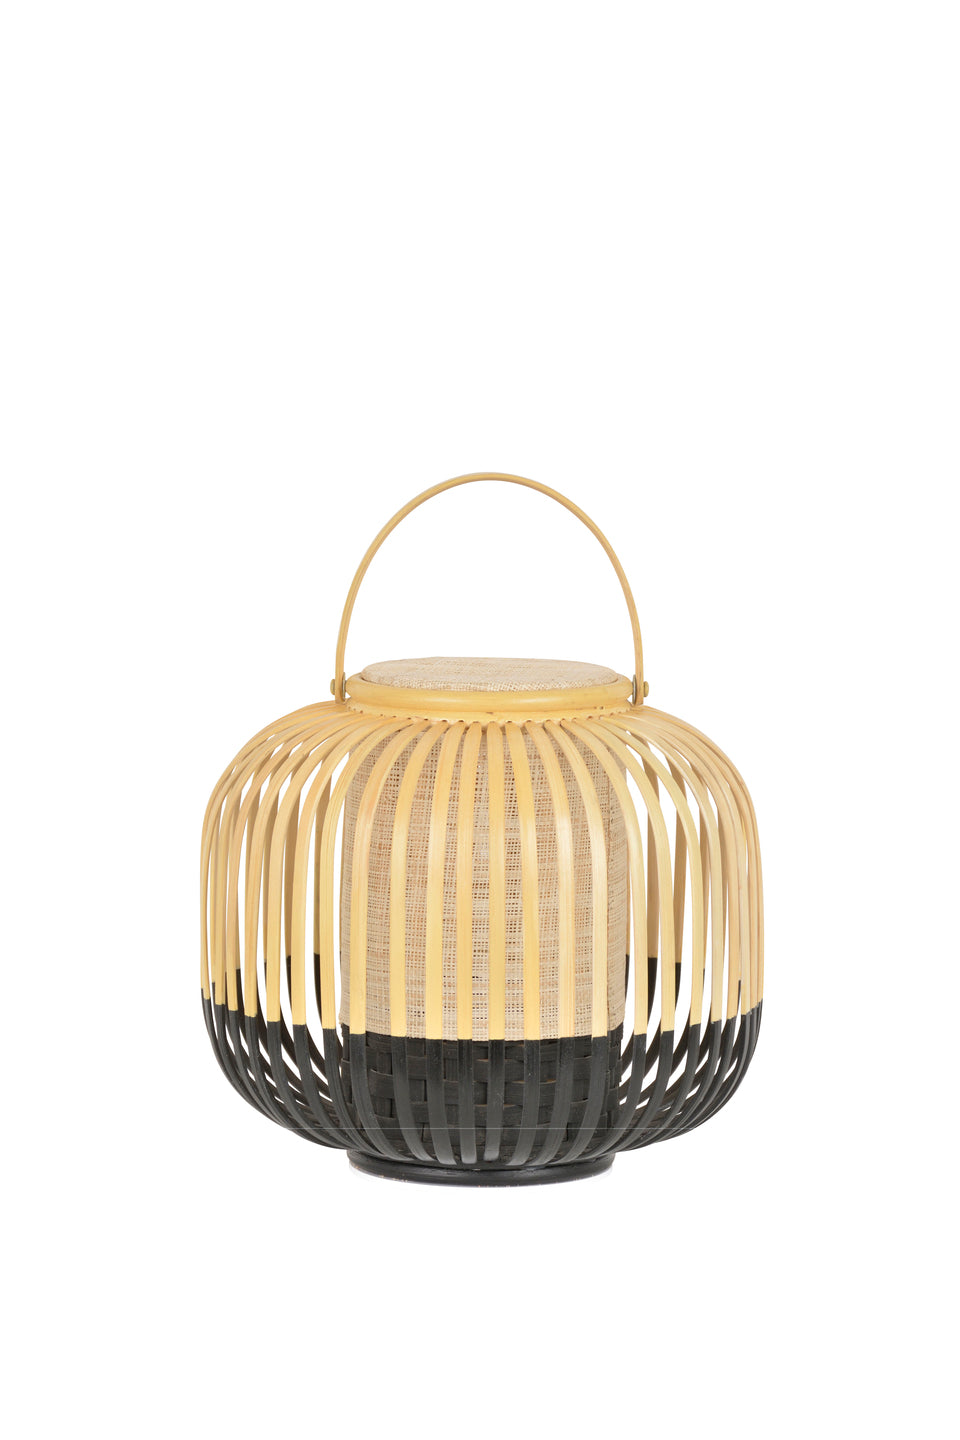 Take A Way X-Small Lamp by Forestier